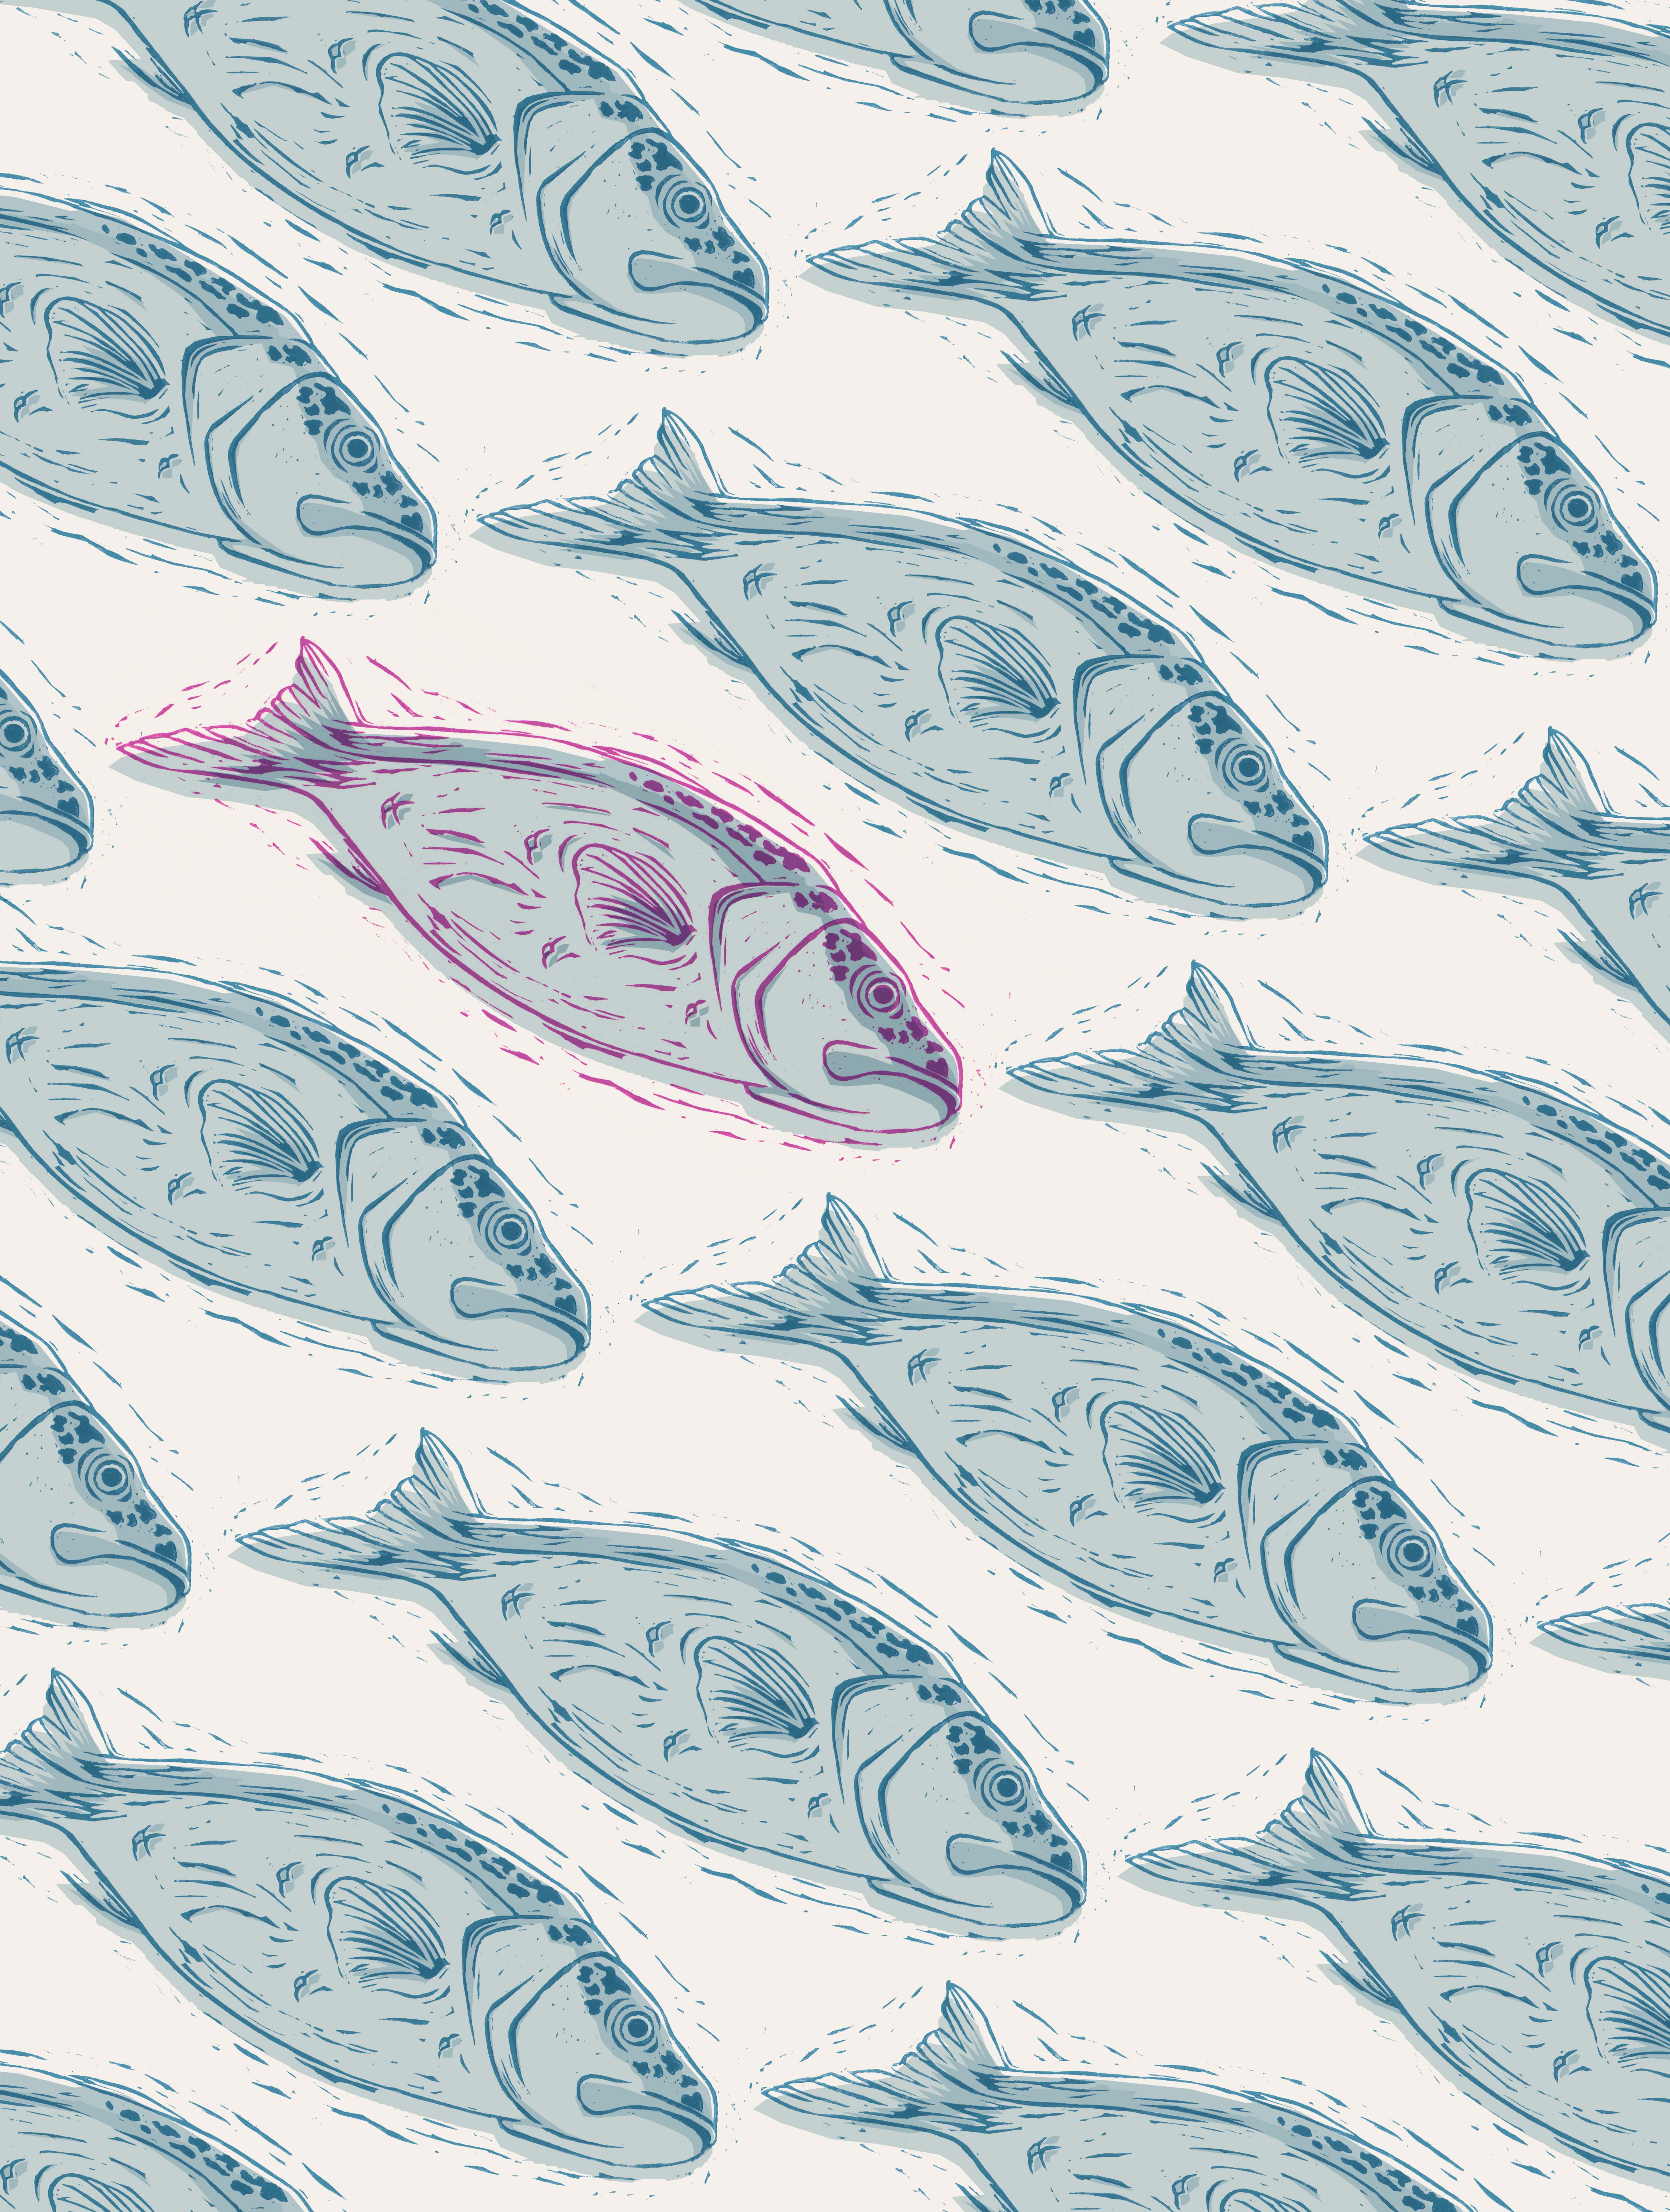 Illustration, pattern of blue fish against a white background.